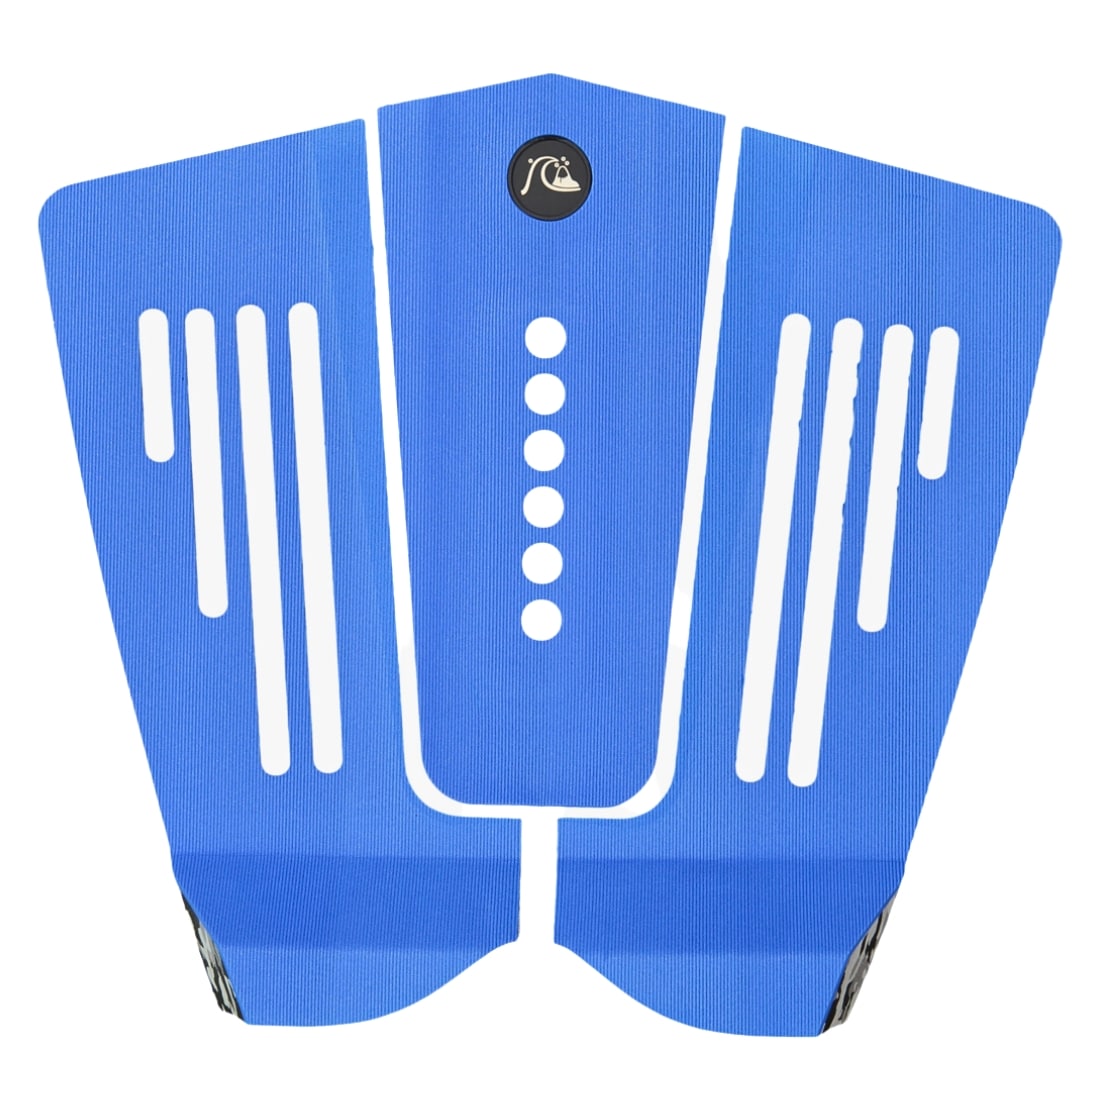 Quiksilver Bat Wide Tail Pad - Blue Jewel - 3 Piece Tail Pad by Quiksilver